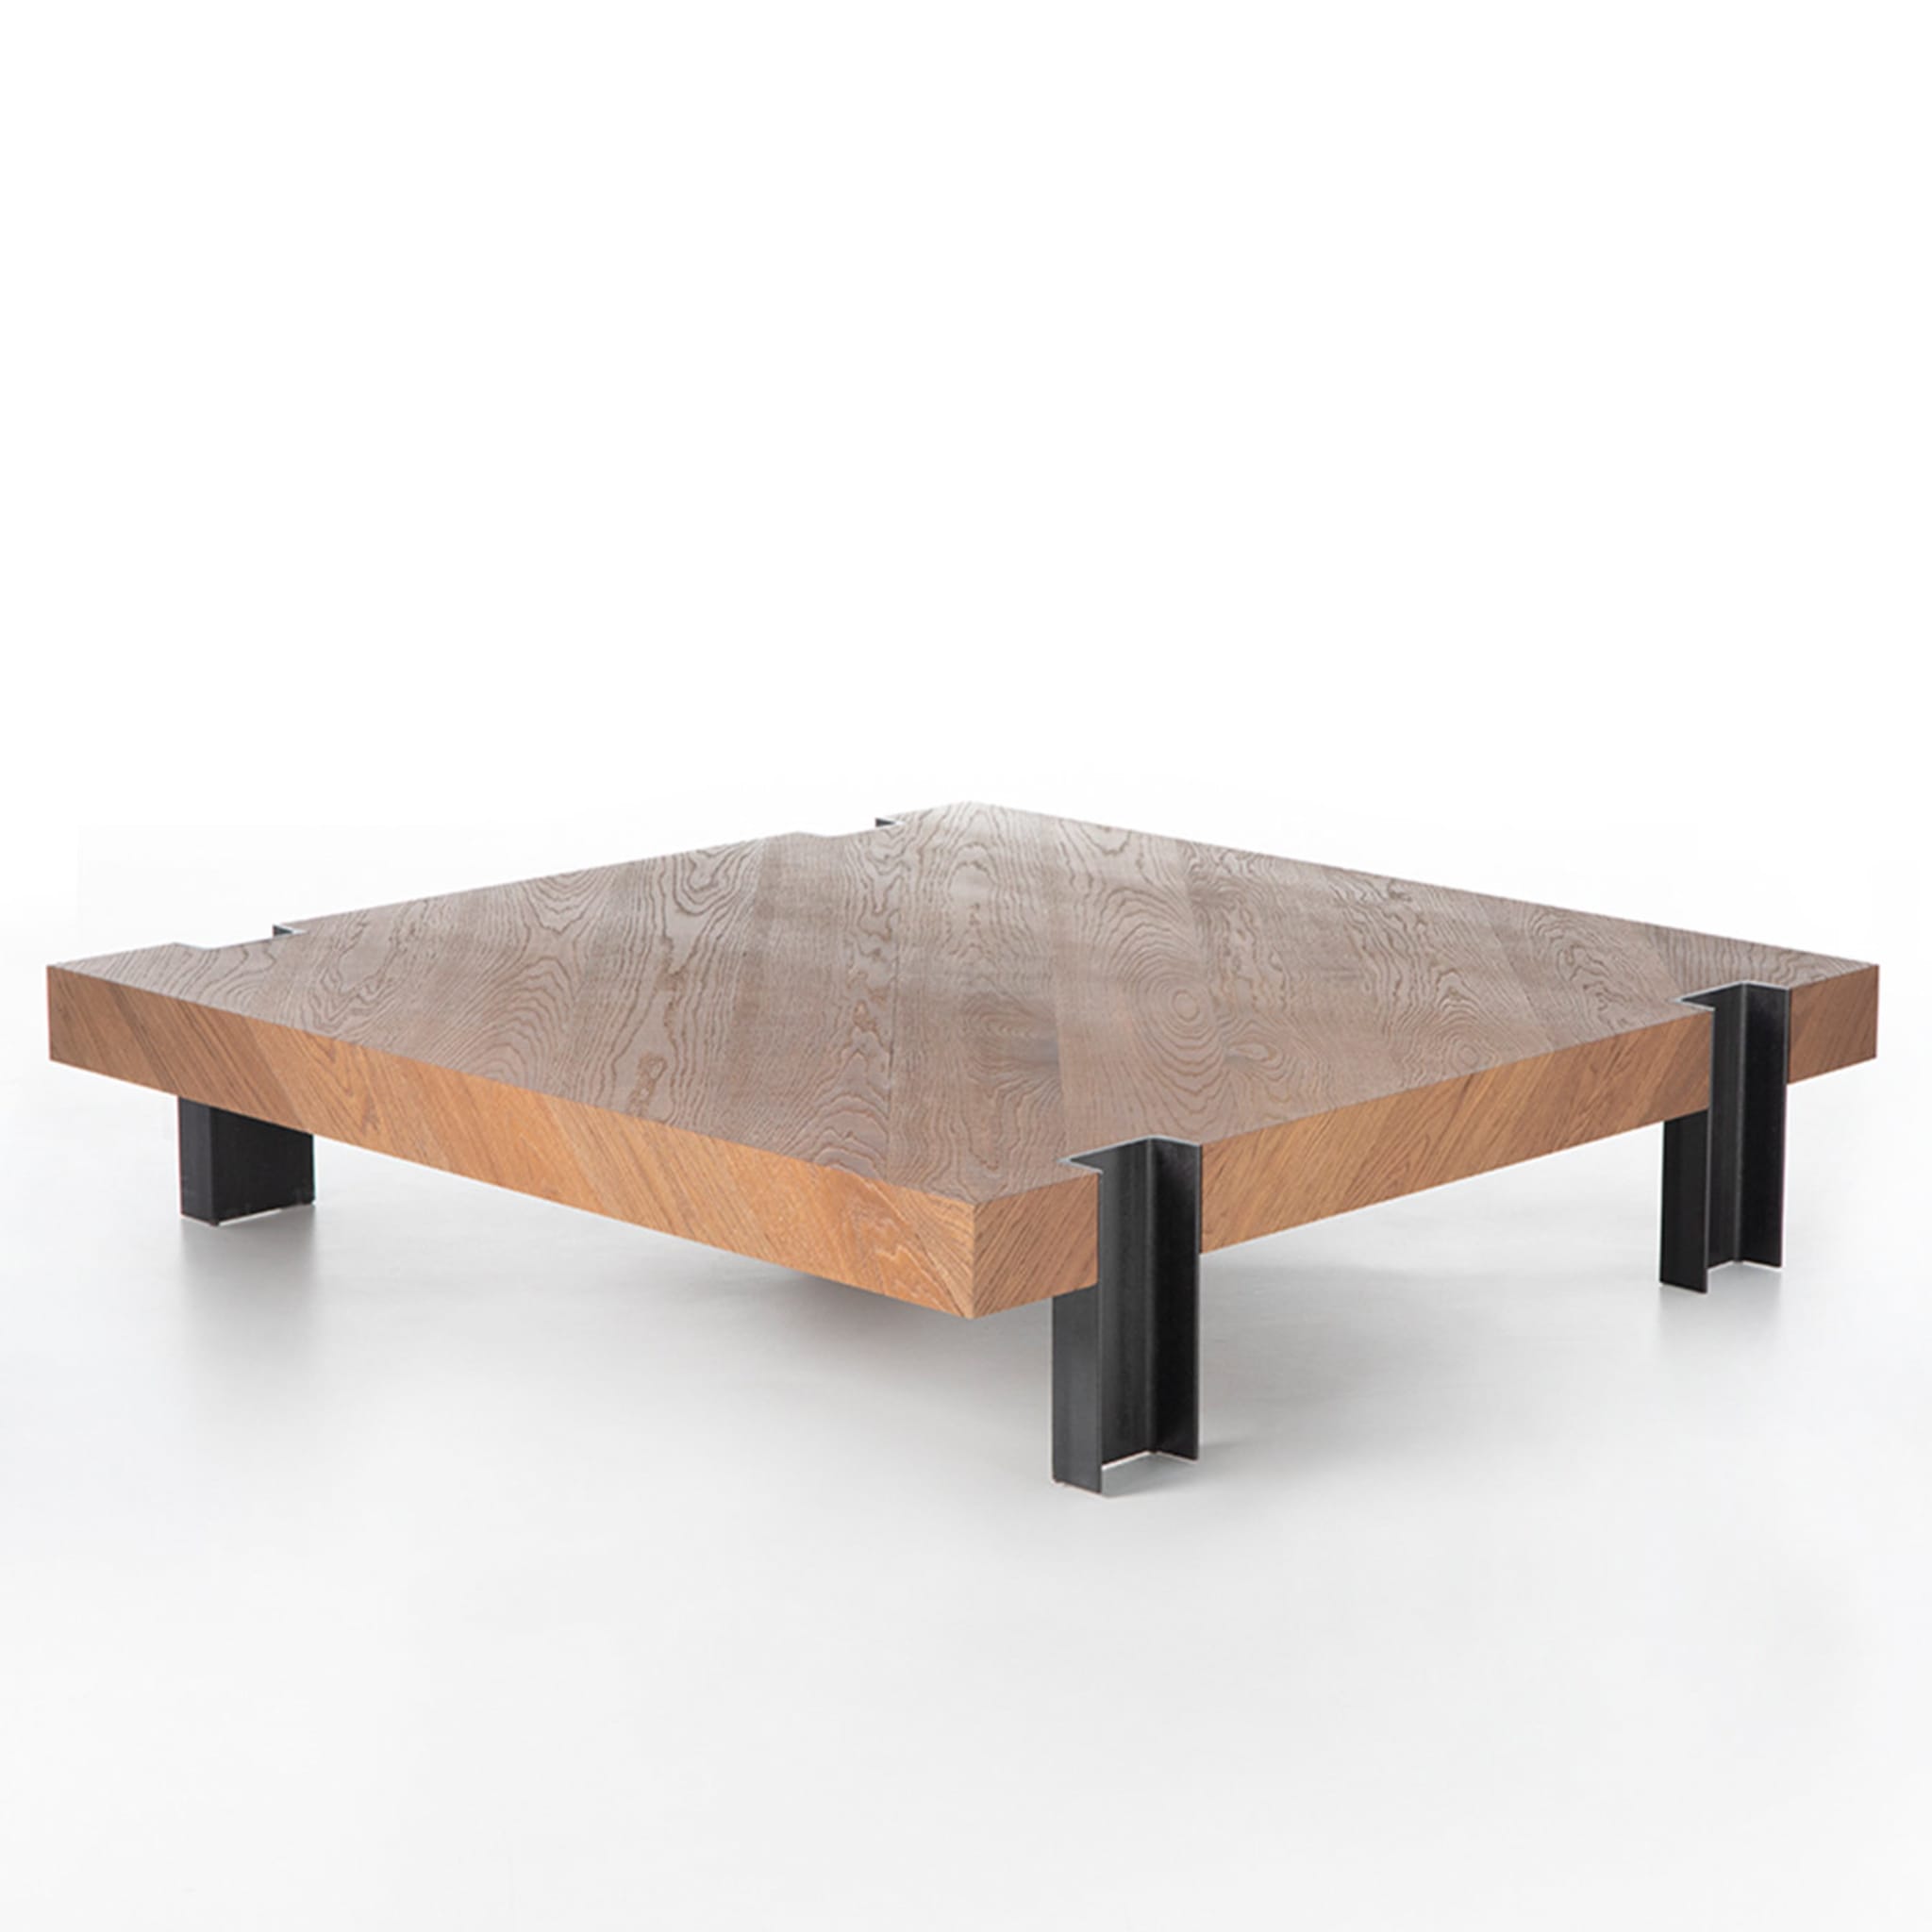 T50 Coffee Table by Jean-Michel Wilmotte - Alternative view 1